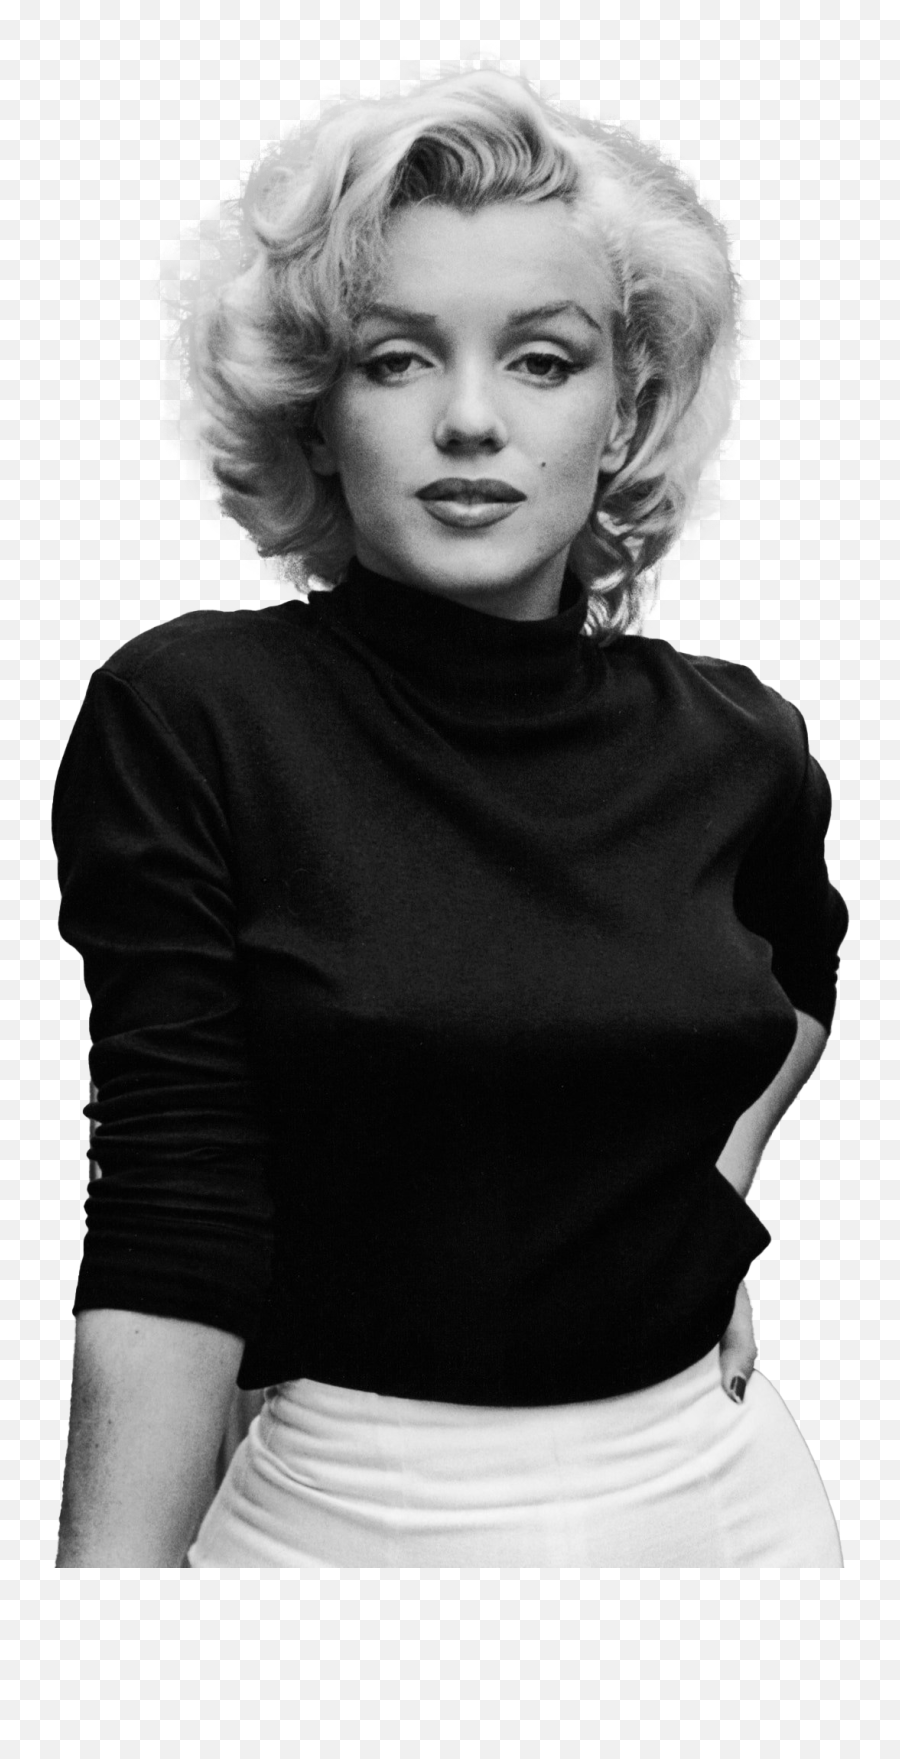 Marilyn Monroe Png High Quality Image - Portrait Of Marilyn Monroe Emoji,Marilyn Monroe Png